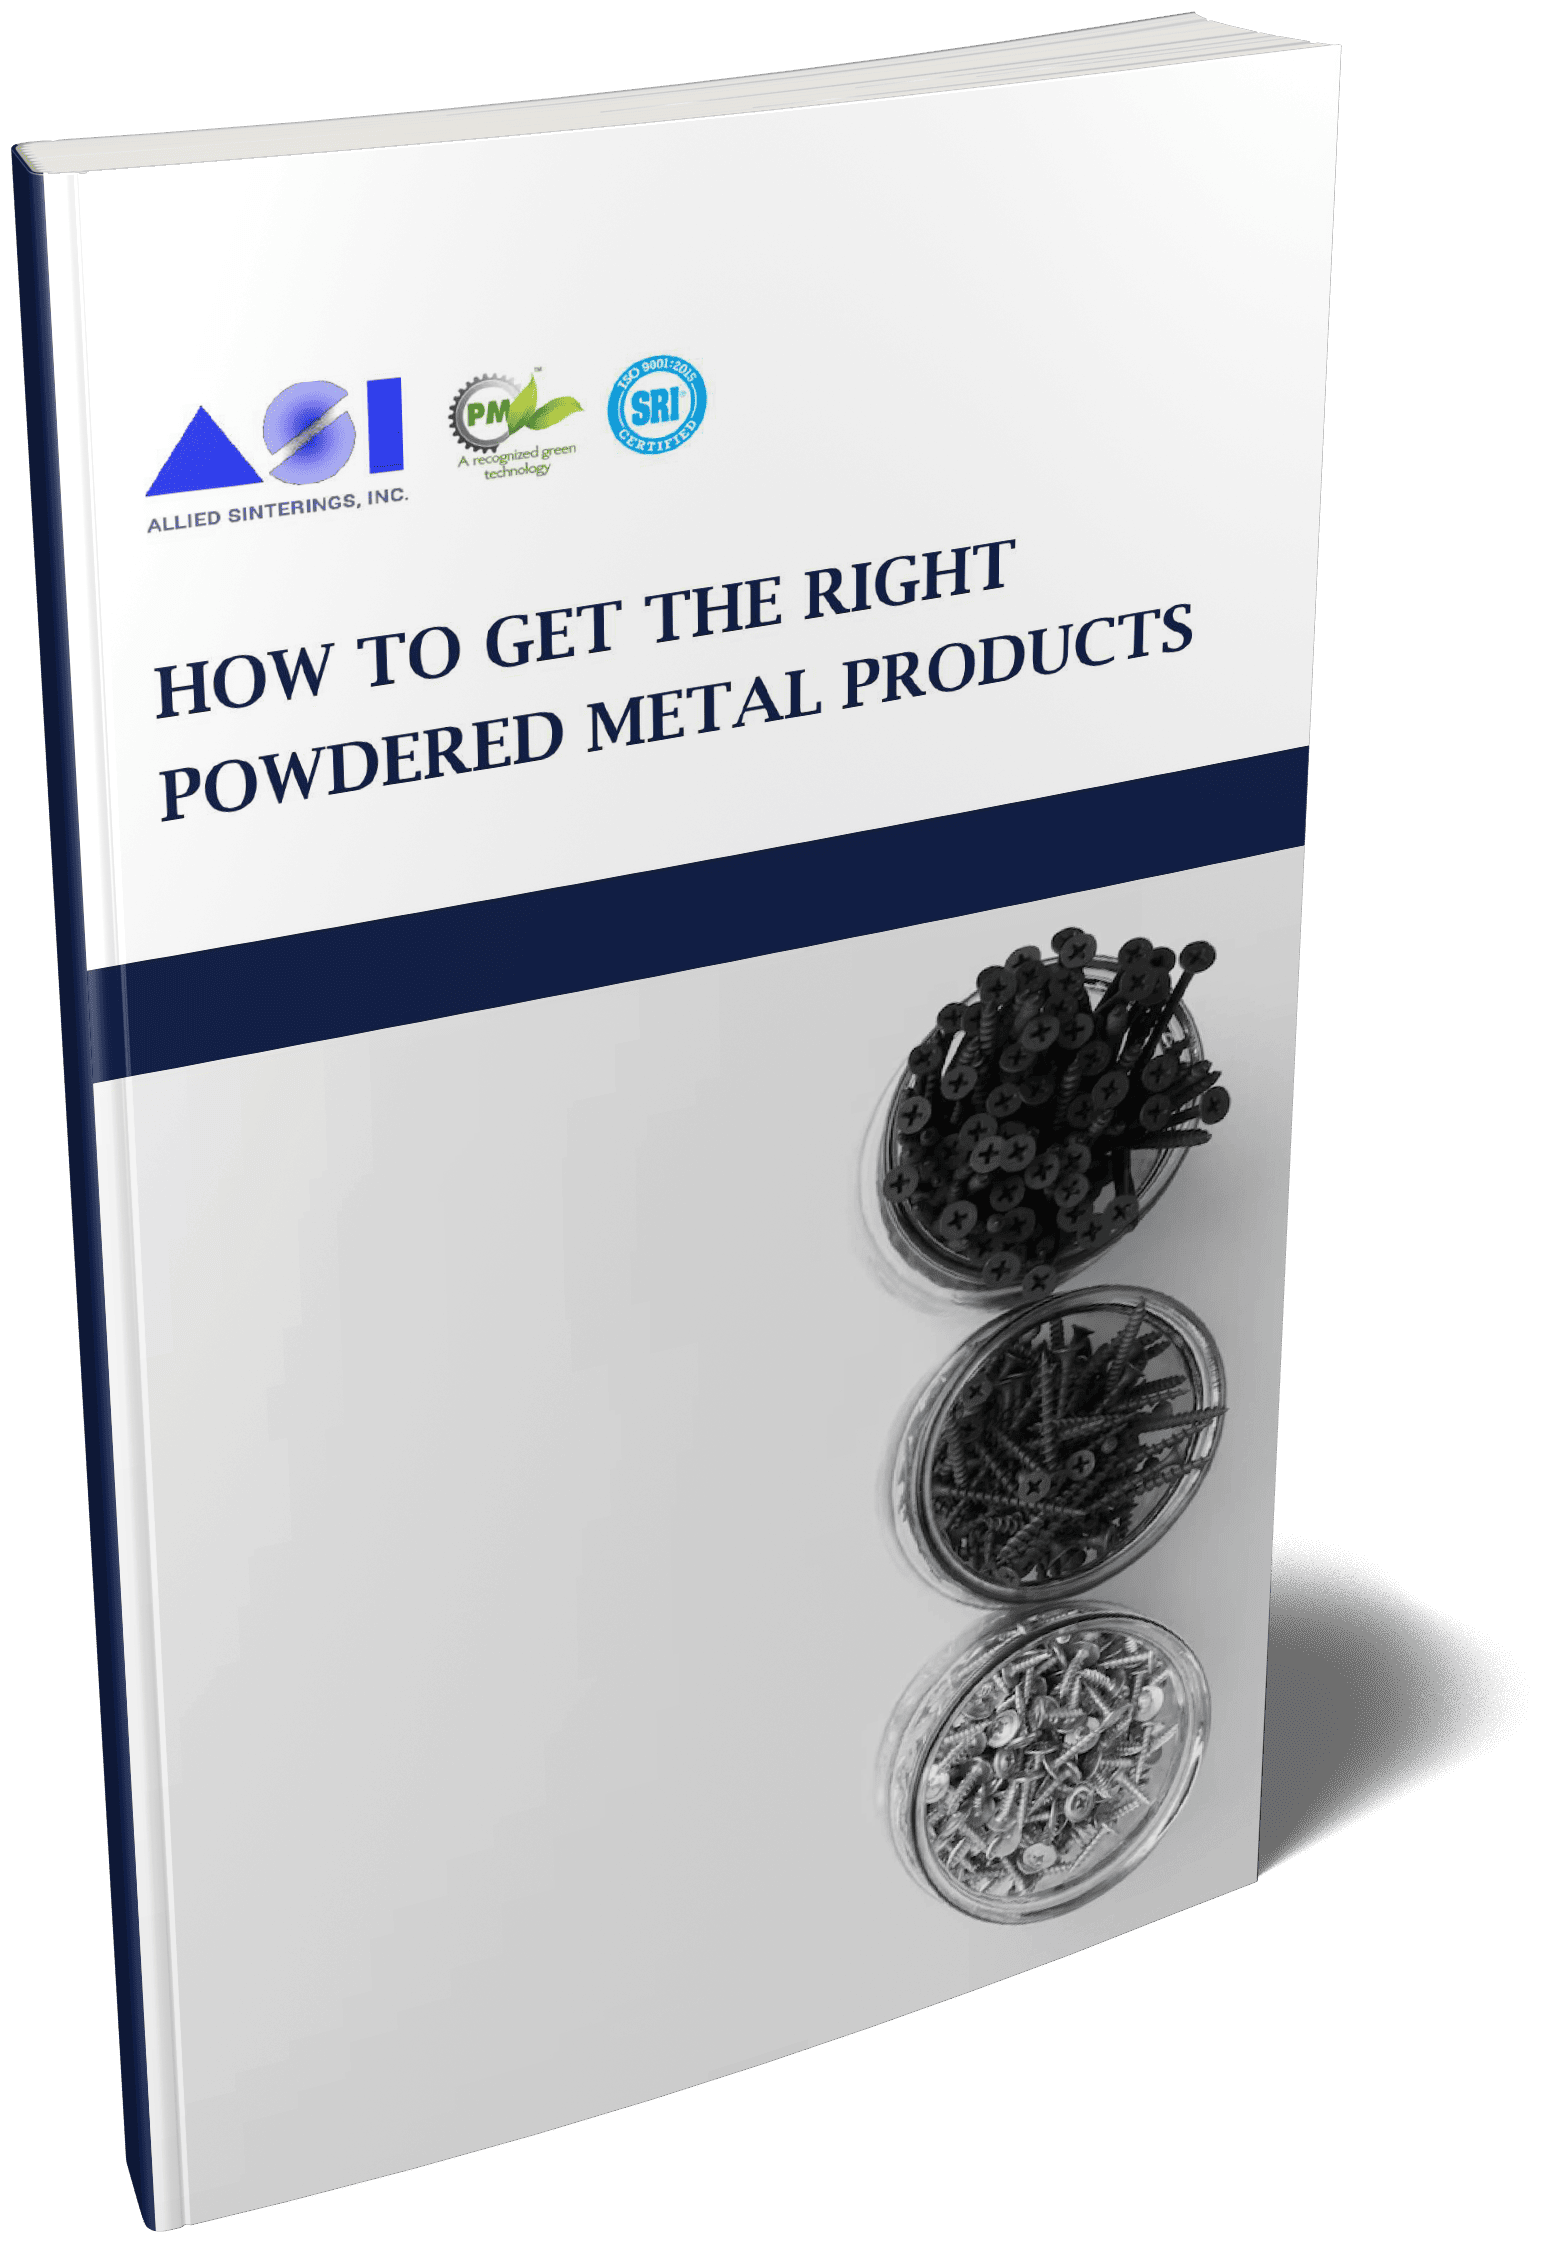 How to get the right powdered metal products